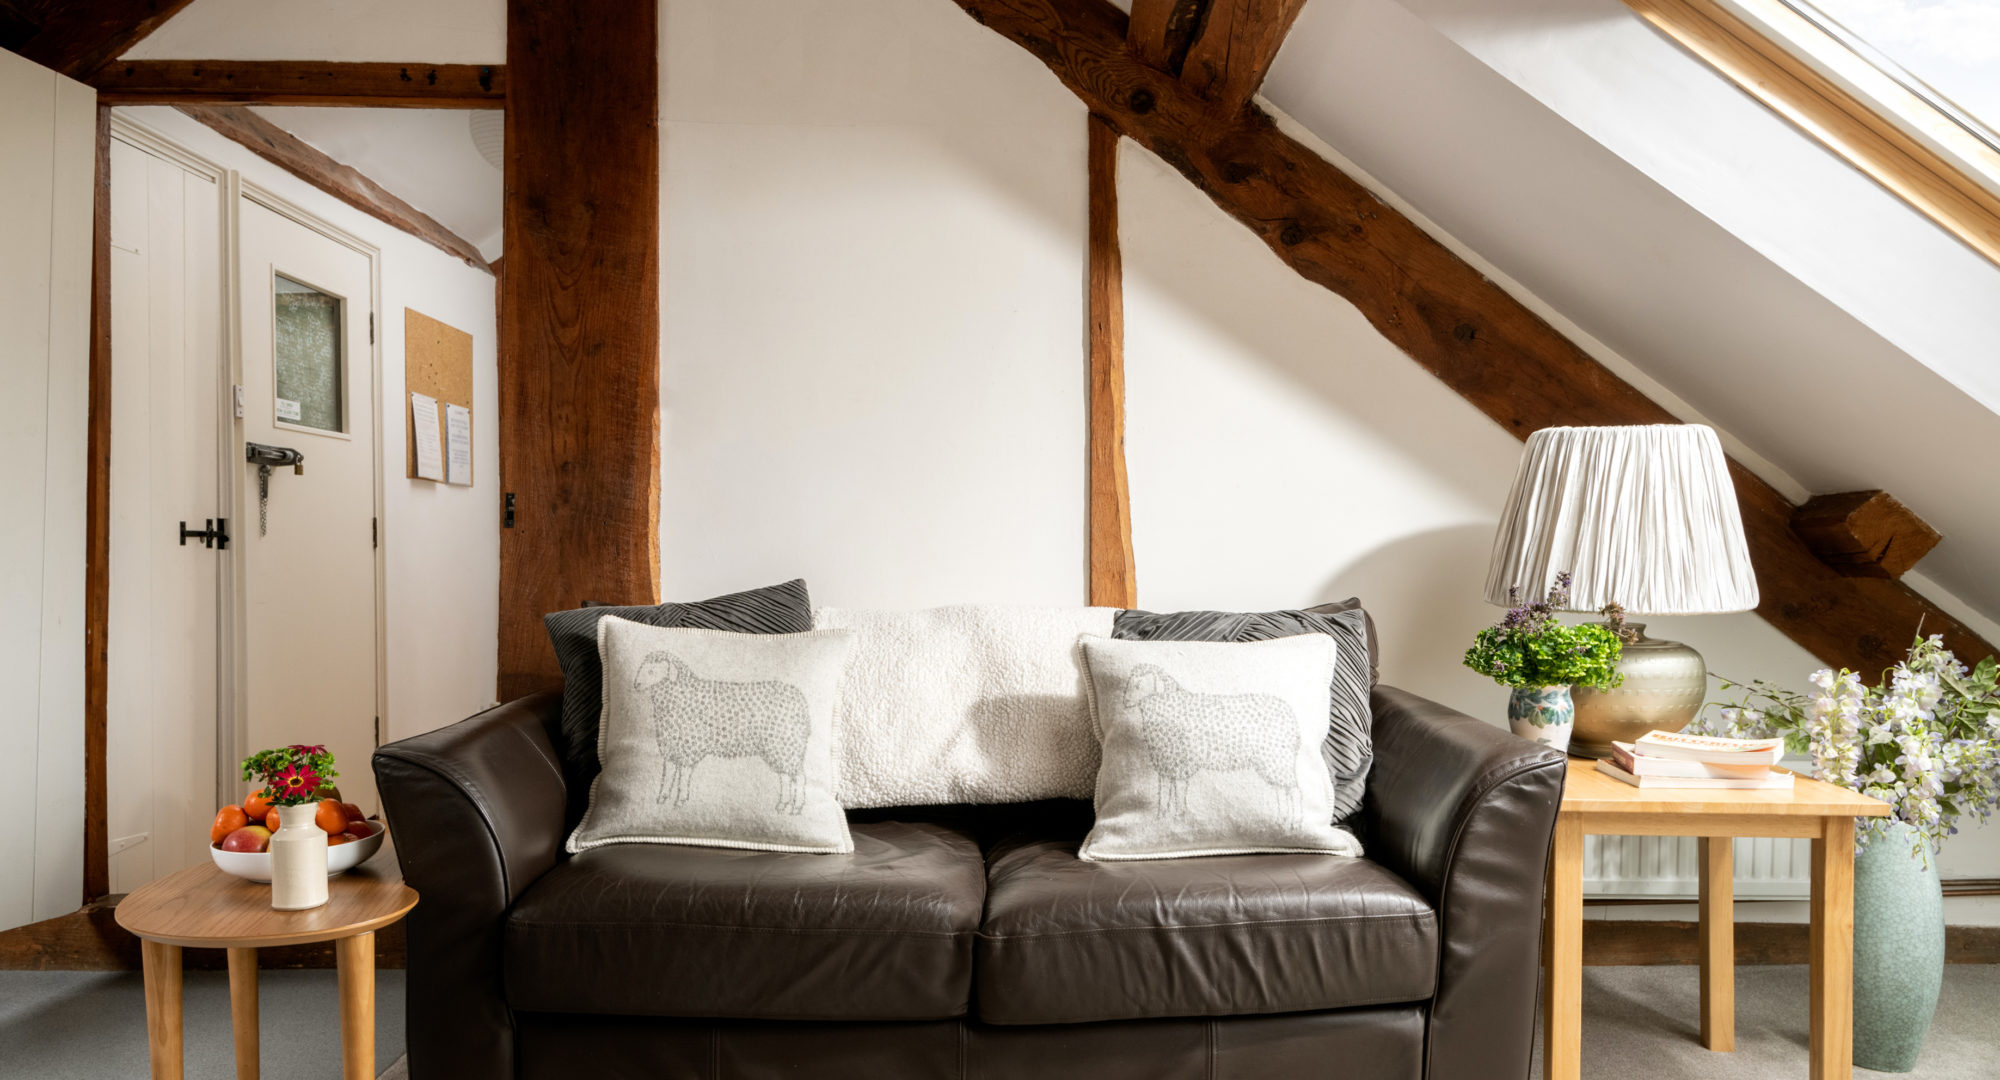 The sitting area in the small farm cottage with a cosy leather sofa